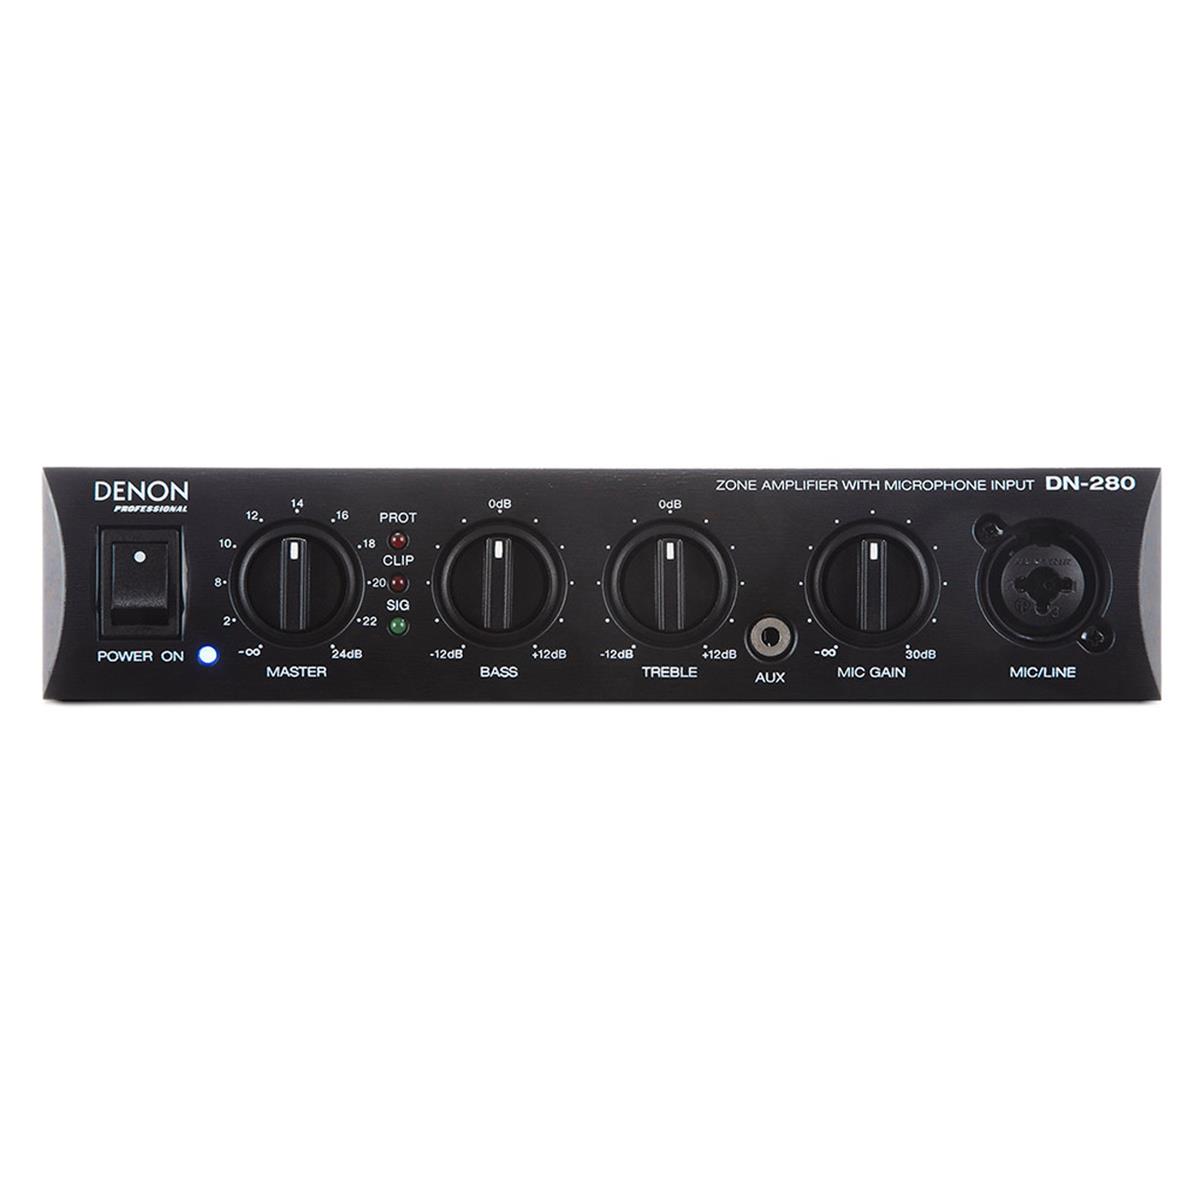 Image of Denon Pro DN-280 Class D 100W Zone Amplifier with Microphone Input